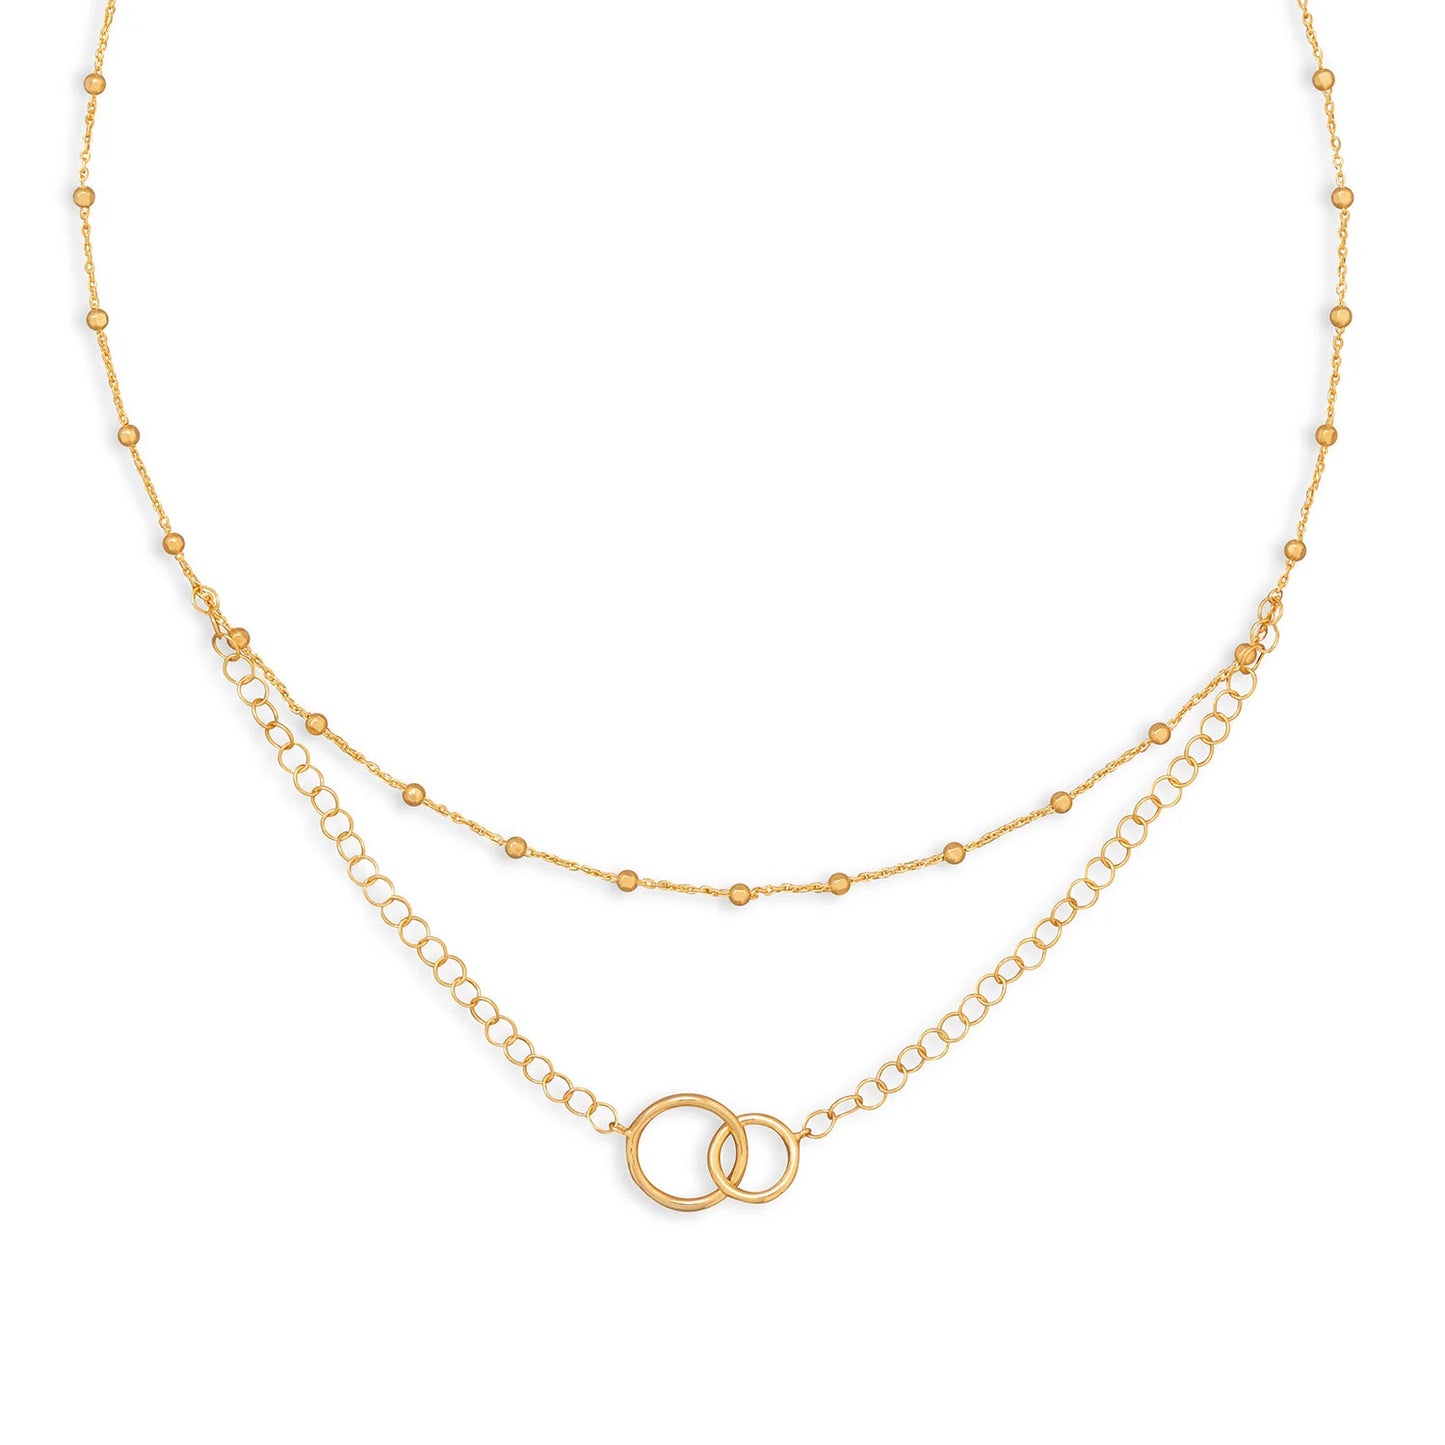 16" 14 Karat Gold Plated Multistrand Beaded Necklace with Circle Link - M H W ACCESSORIES LLC